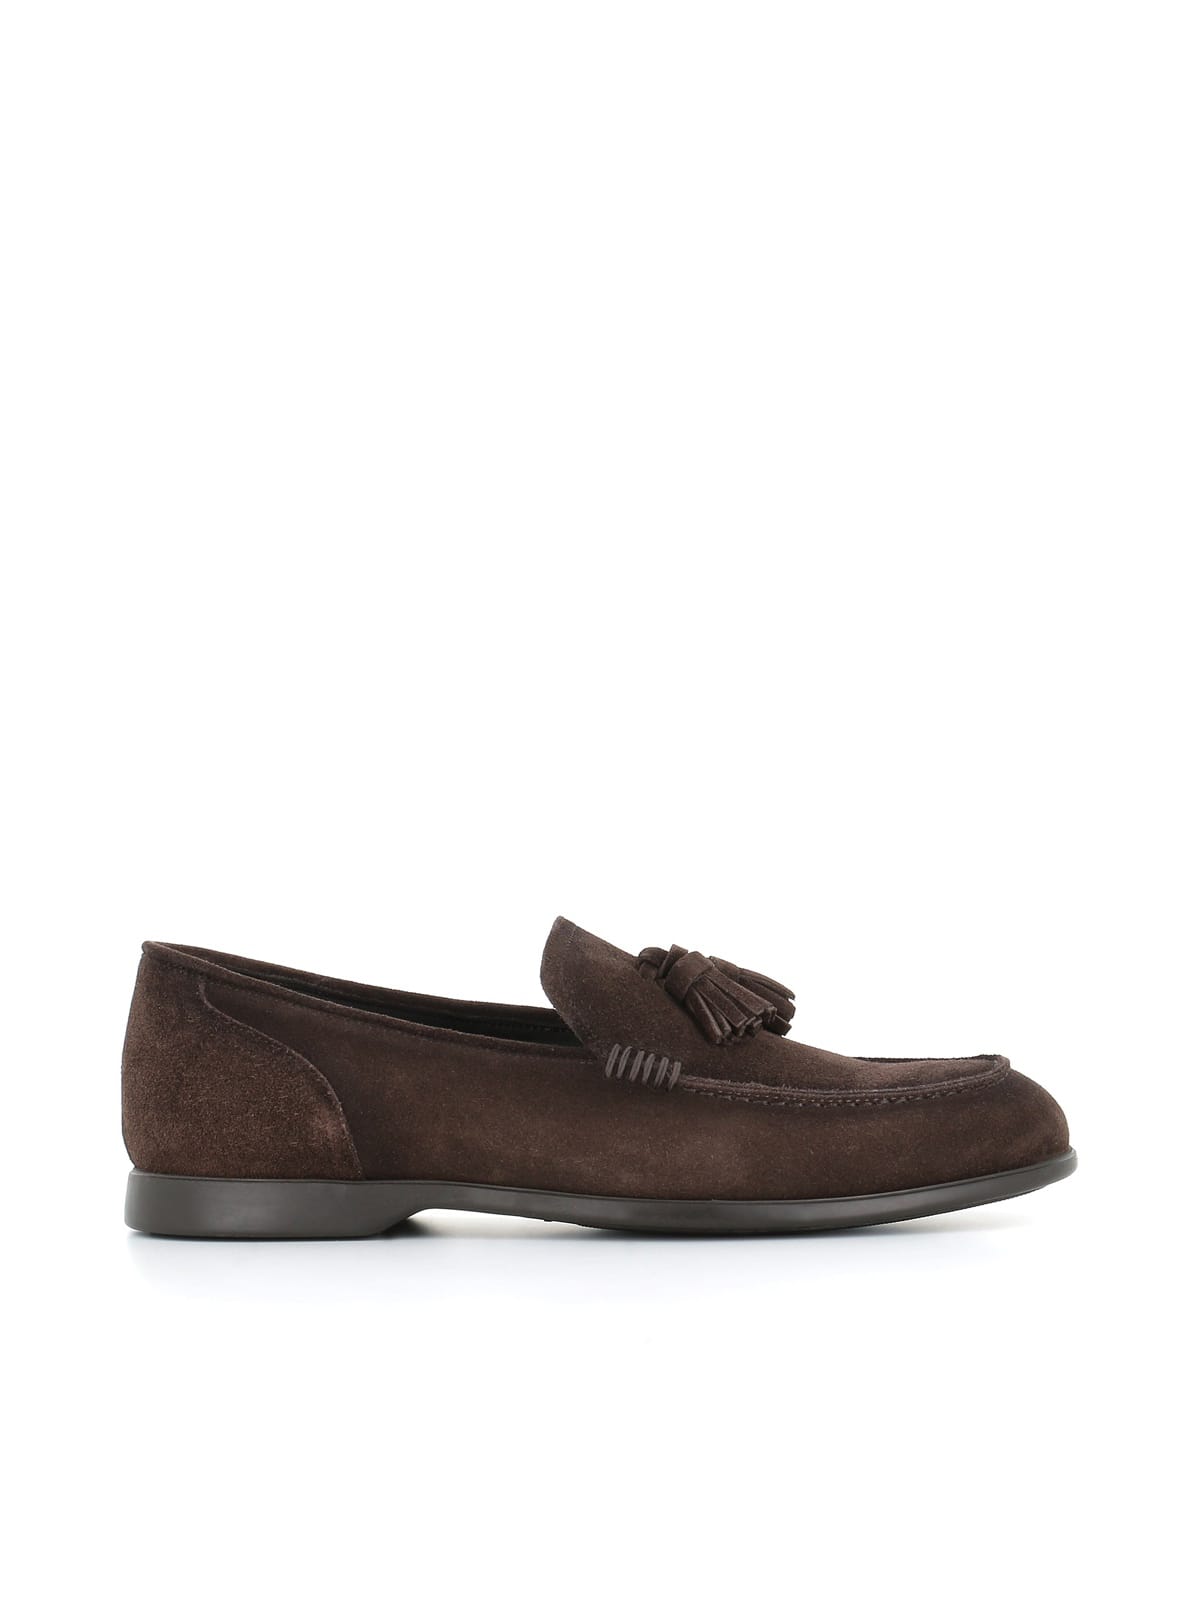 Pantanetti Tassel Loafer 17445a In Brown